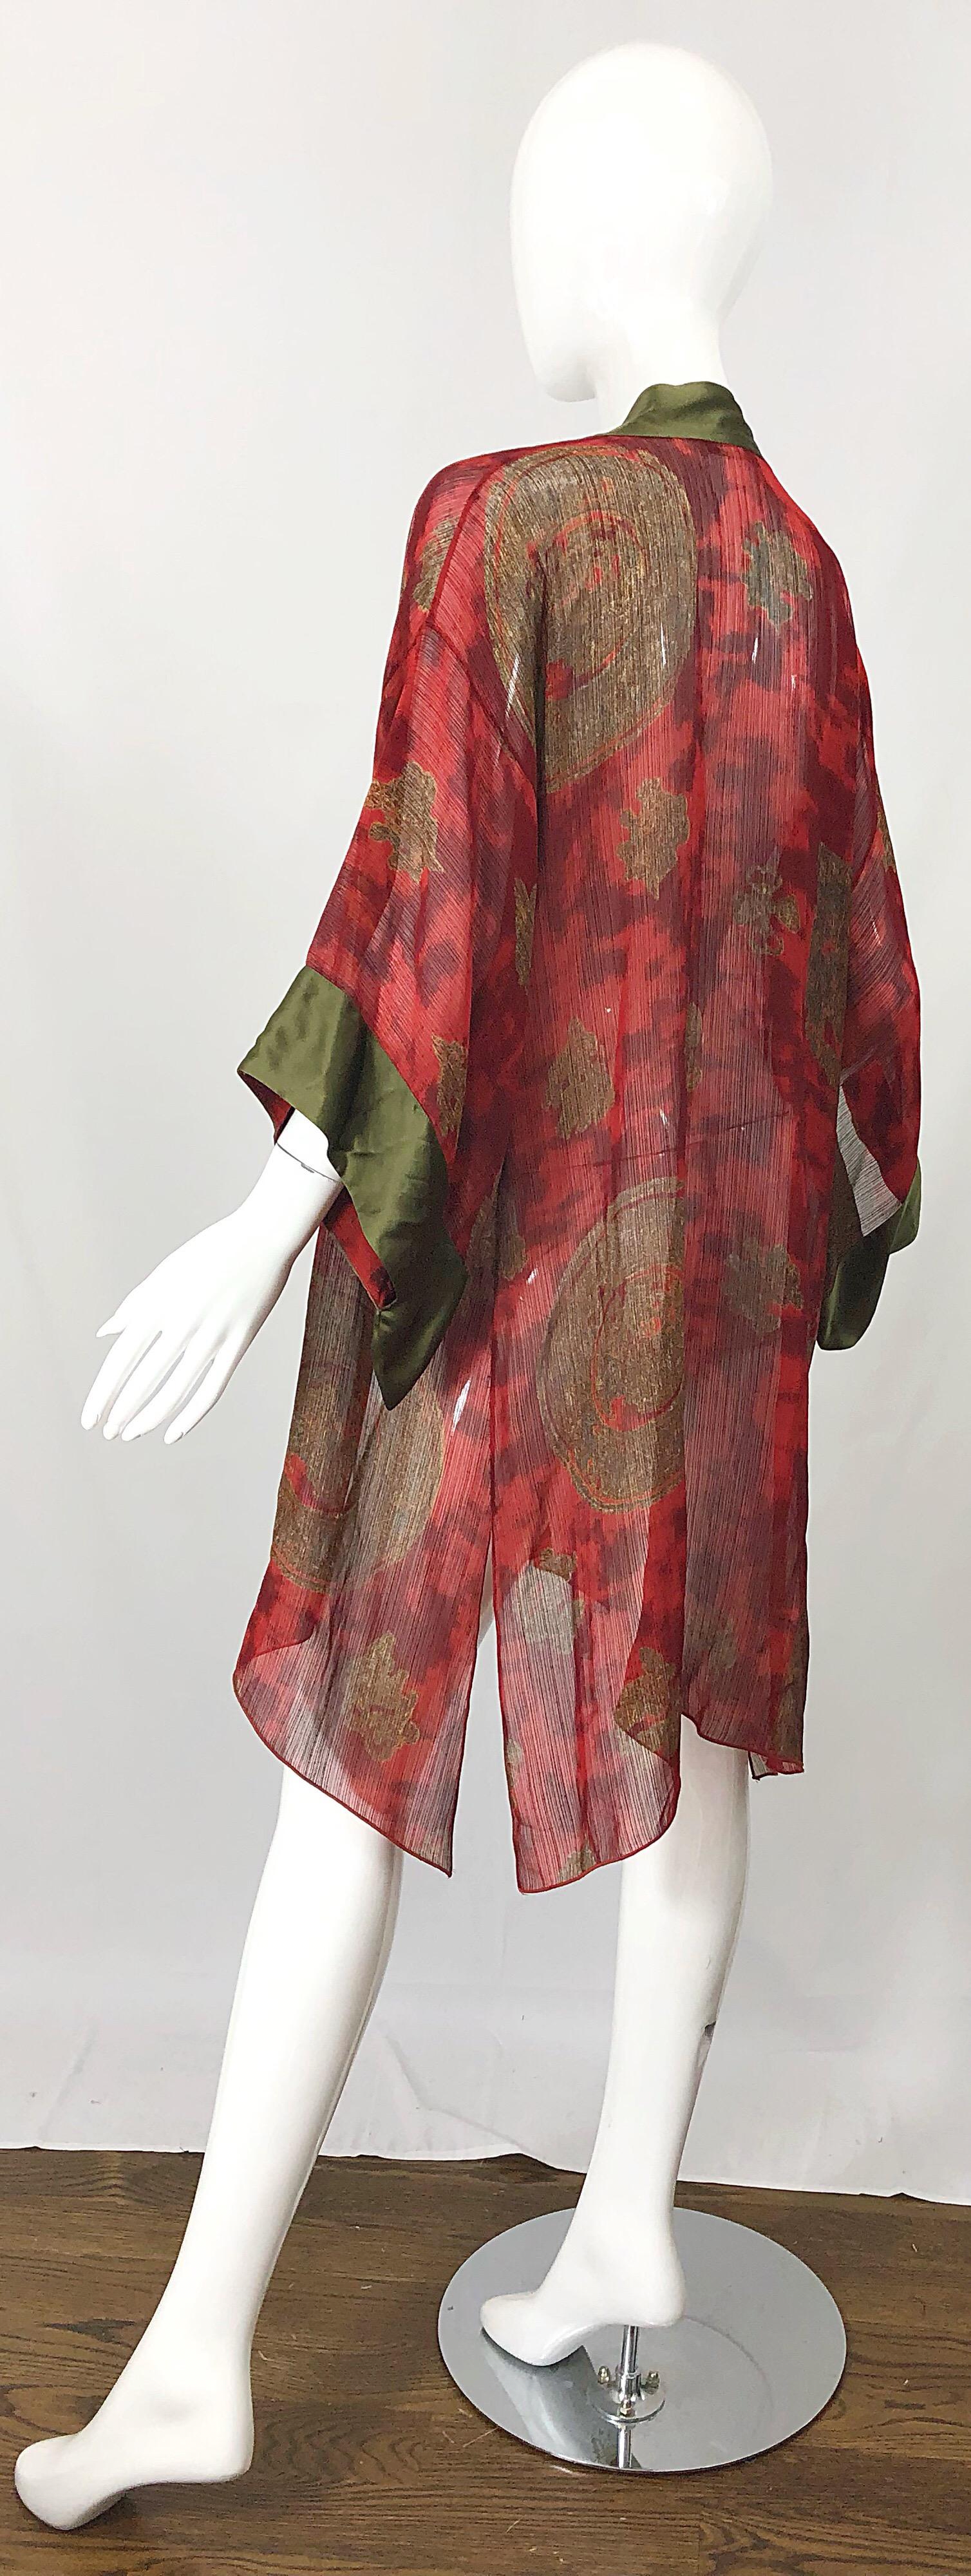 Vintage Holly's Harp Red Olive Green Gold Silk Chiffon Sheer Kimono Jacket For Sale 4